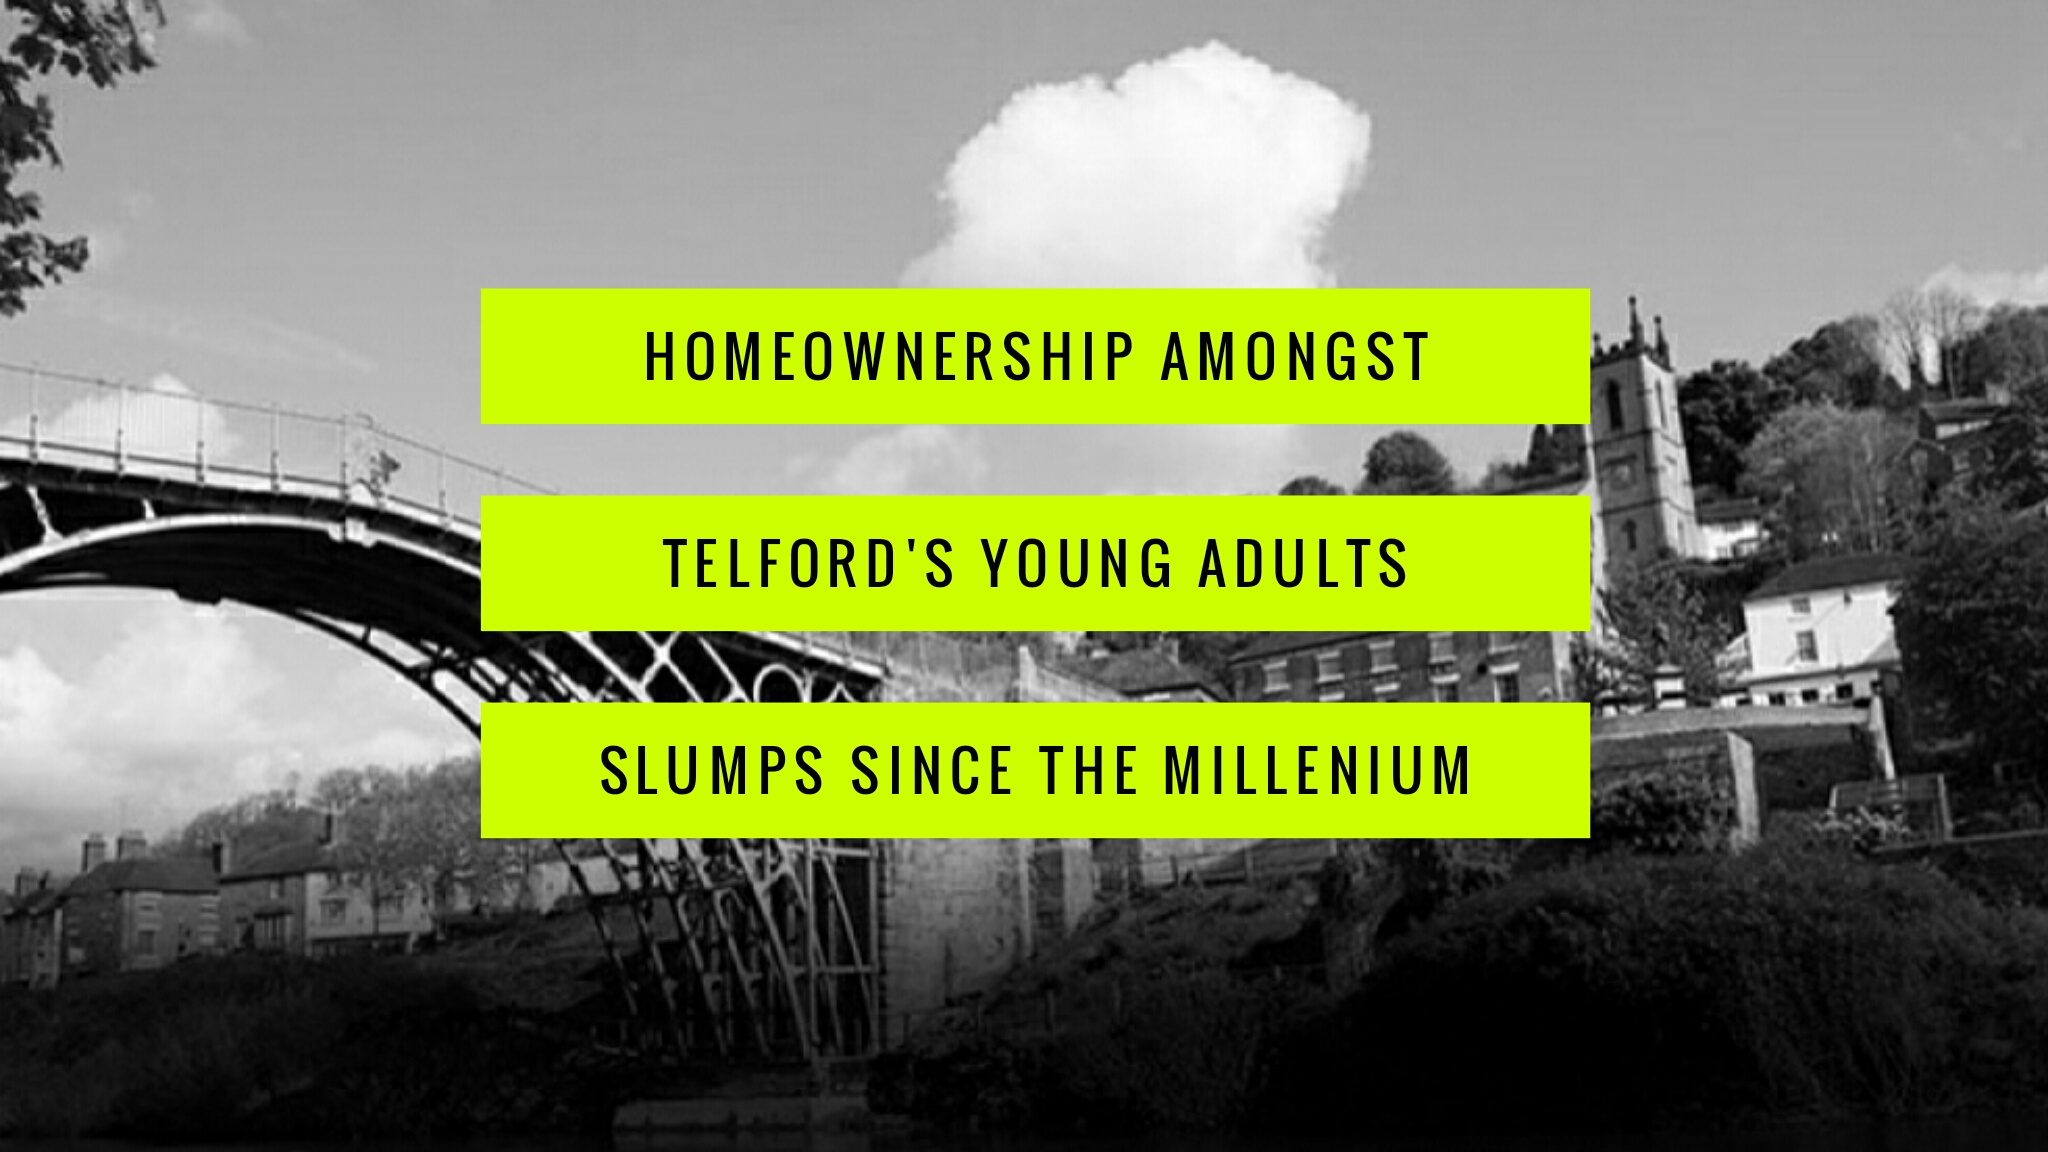 Homeownership Amongst Telford’s Young Adults Slumps to 49.68%